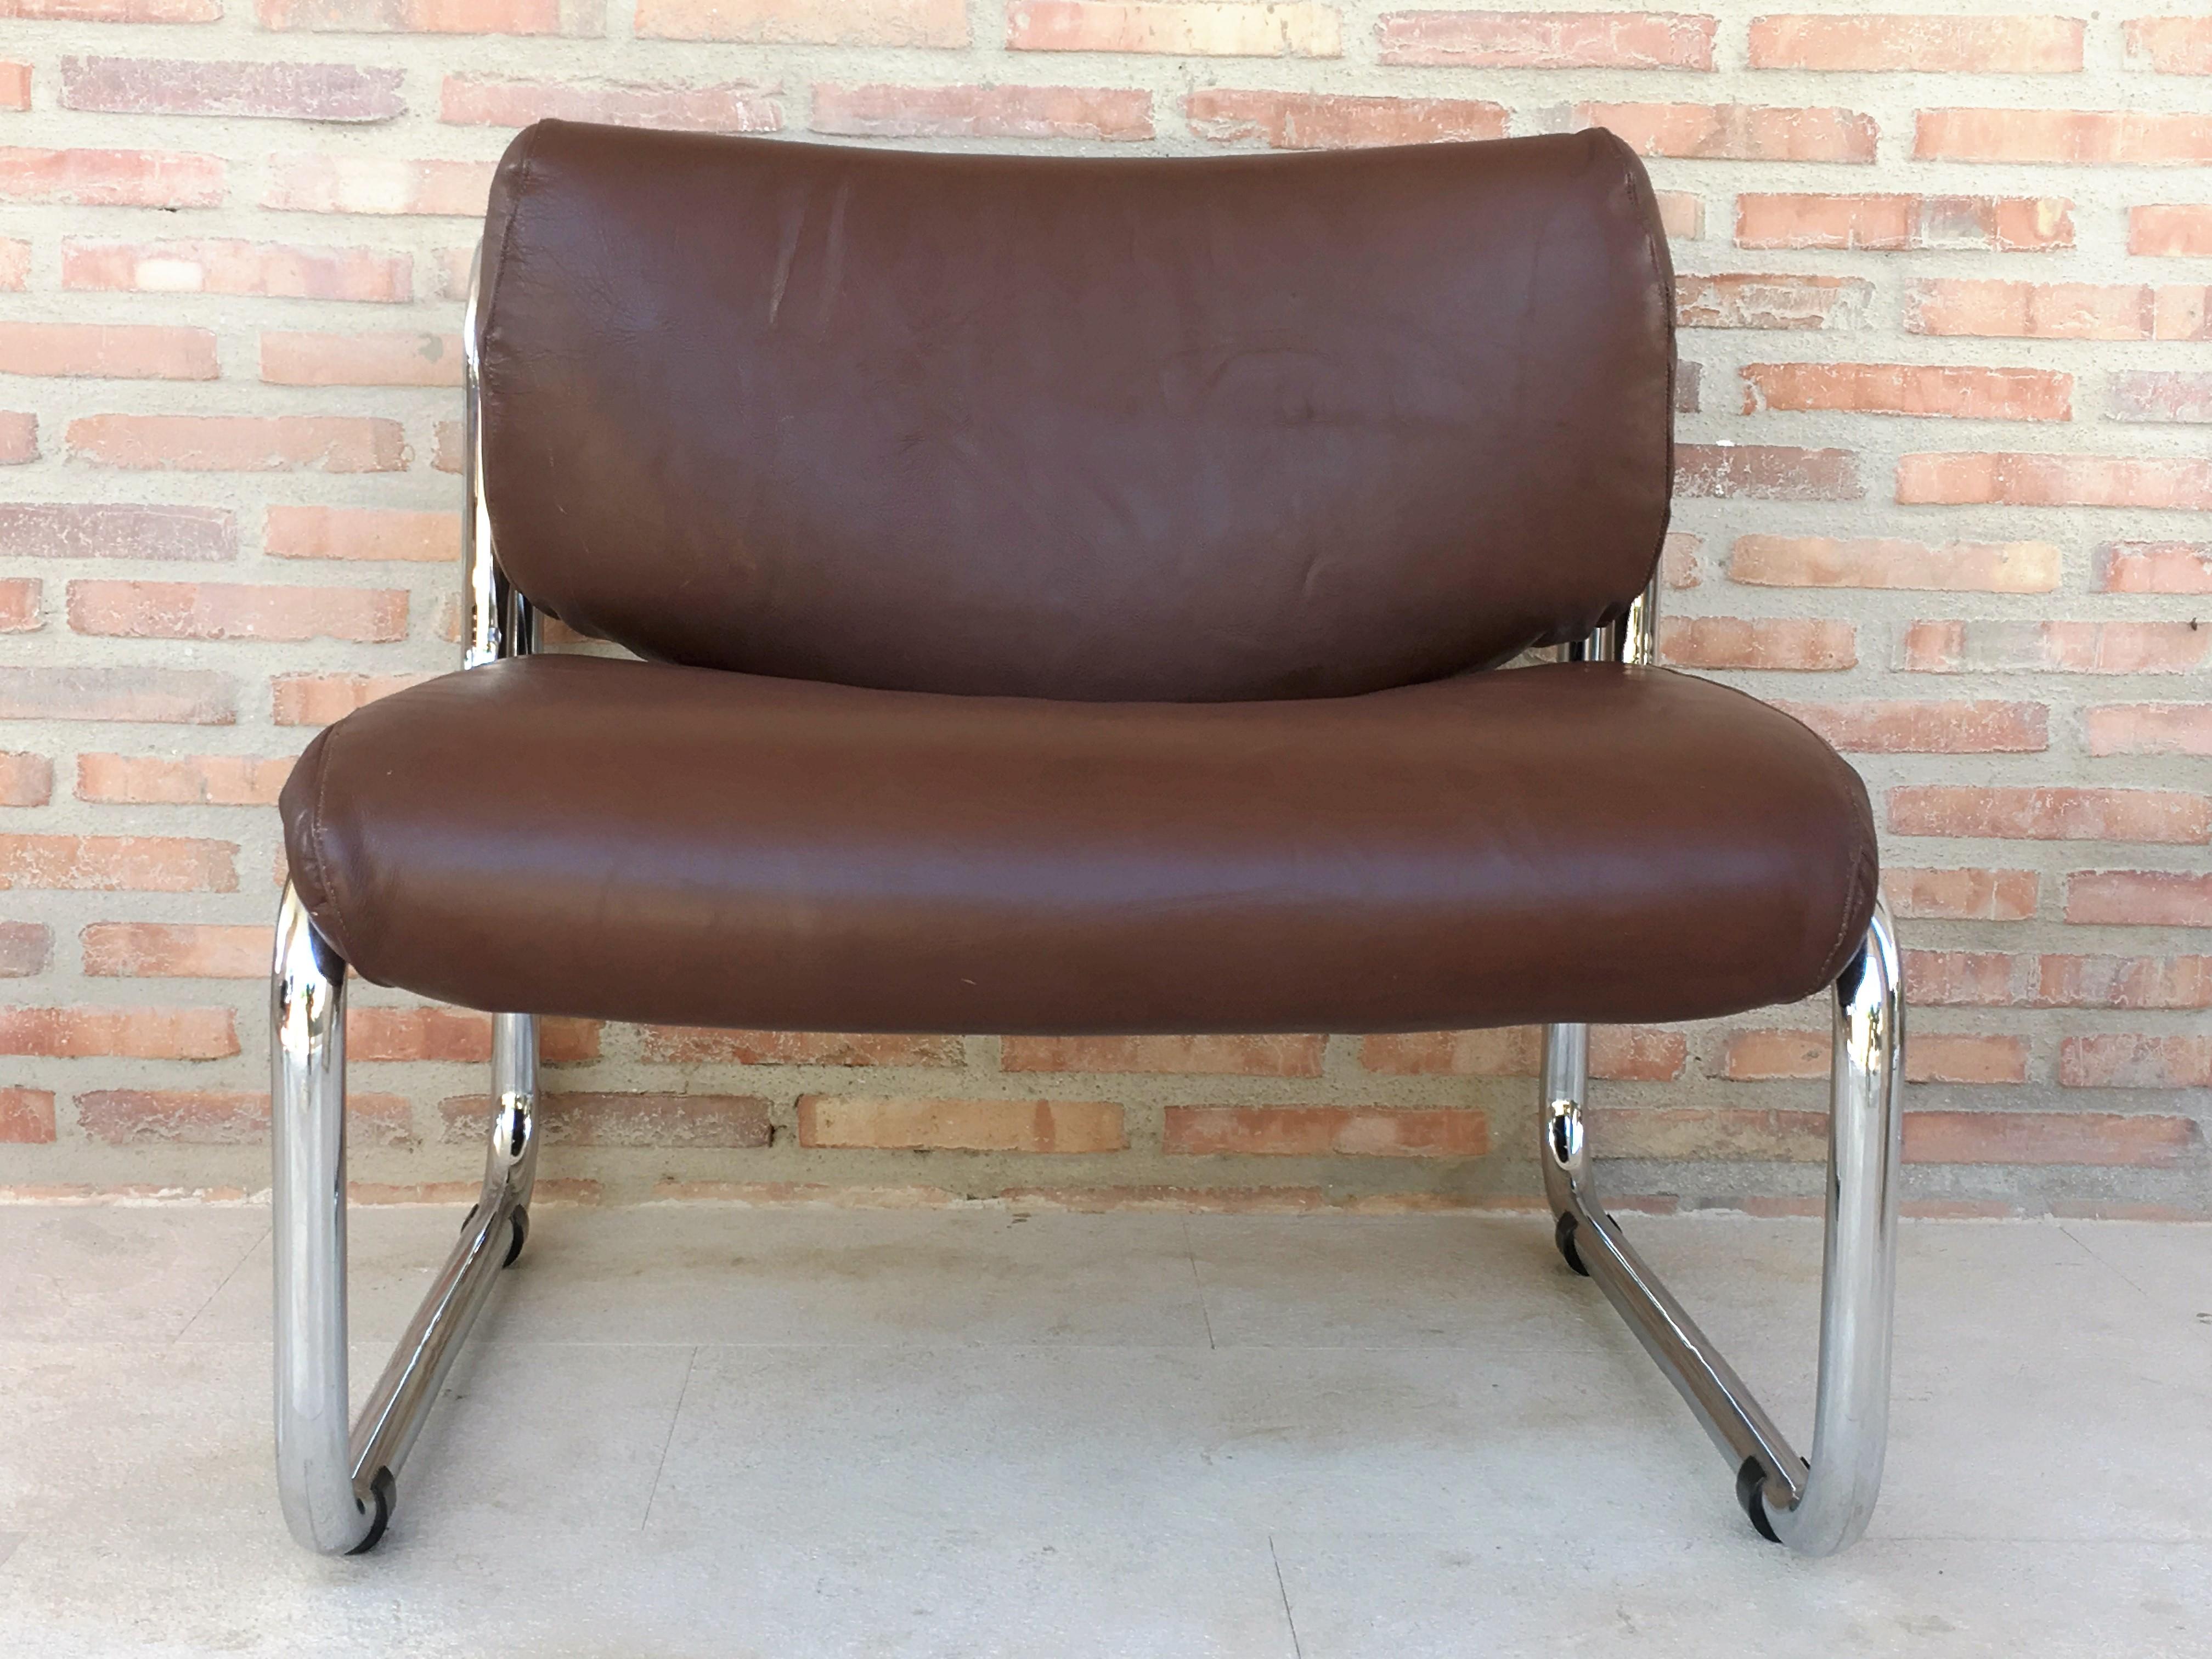 20th Century Midcentury Sculptural Chrome and Leather Italian Lounge Chair